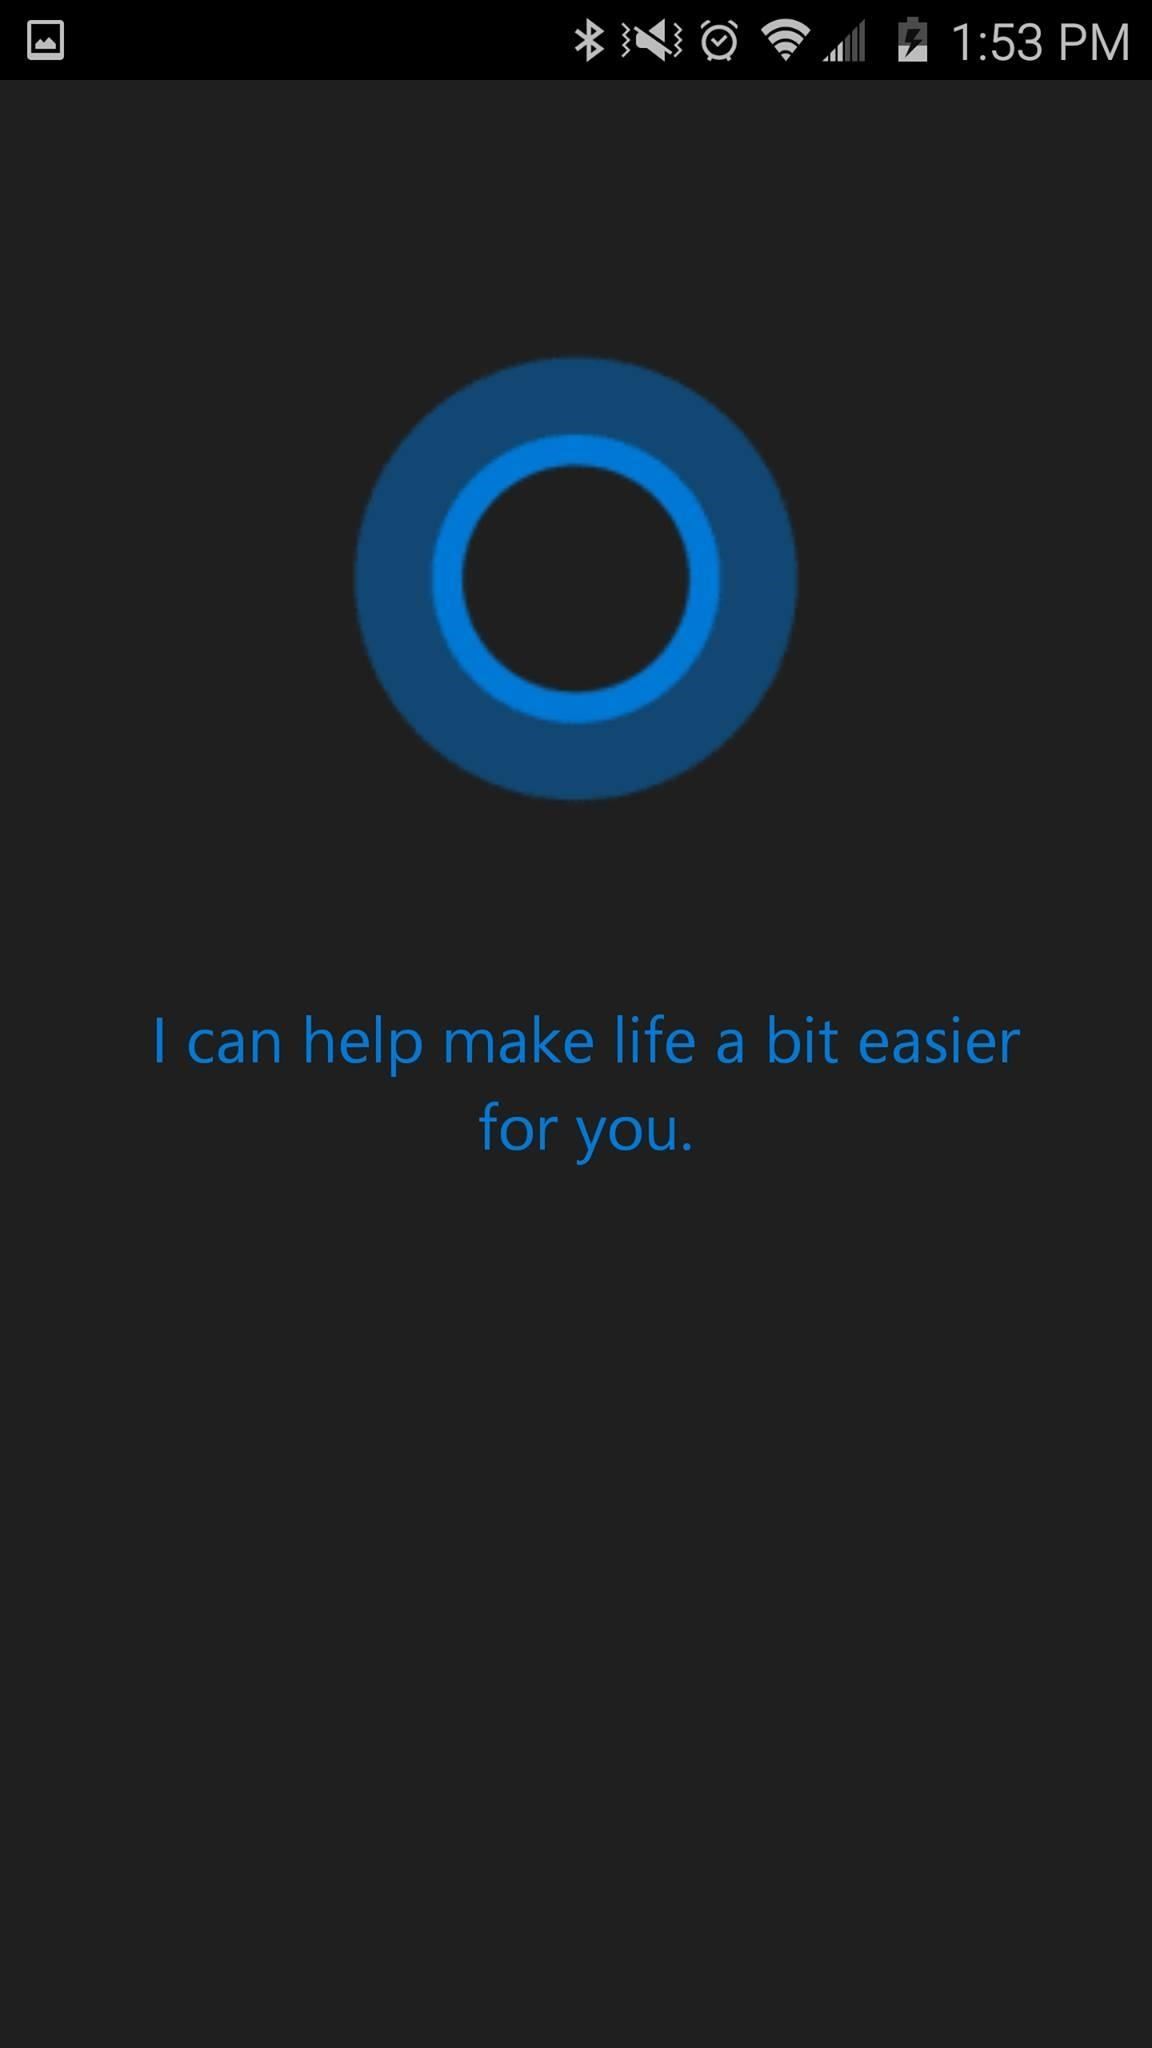 Cortana for Android Has Leaked & Here's How to Install It (Update: It's Now on the Play Store)